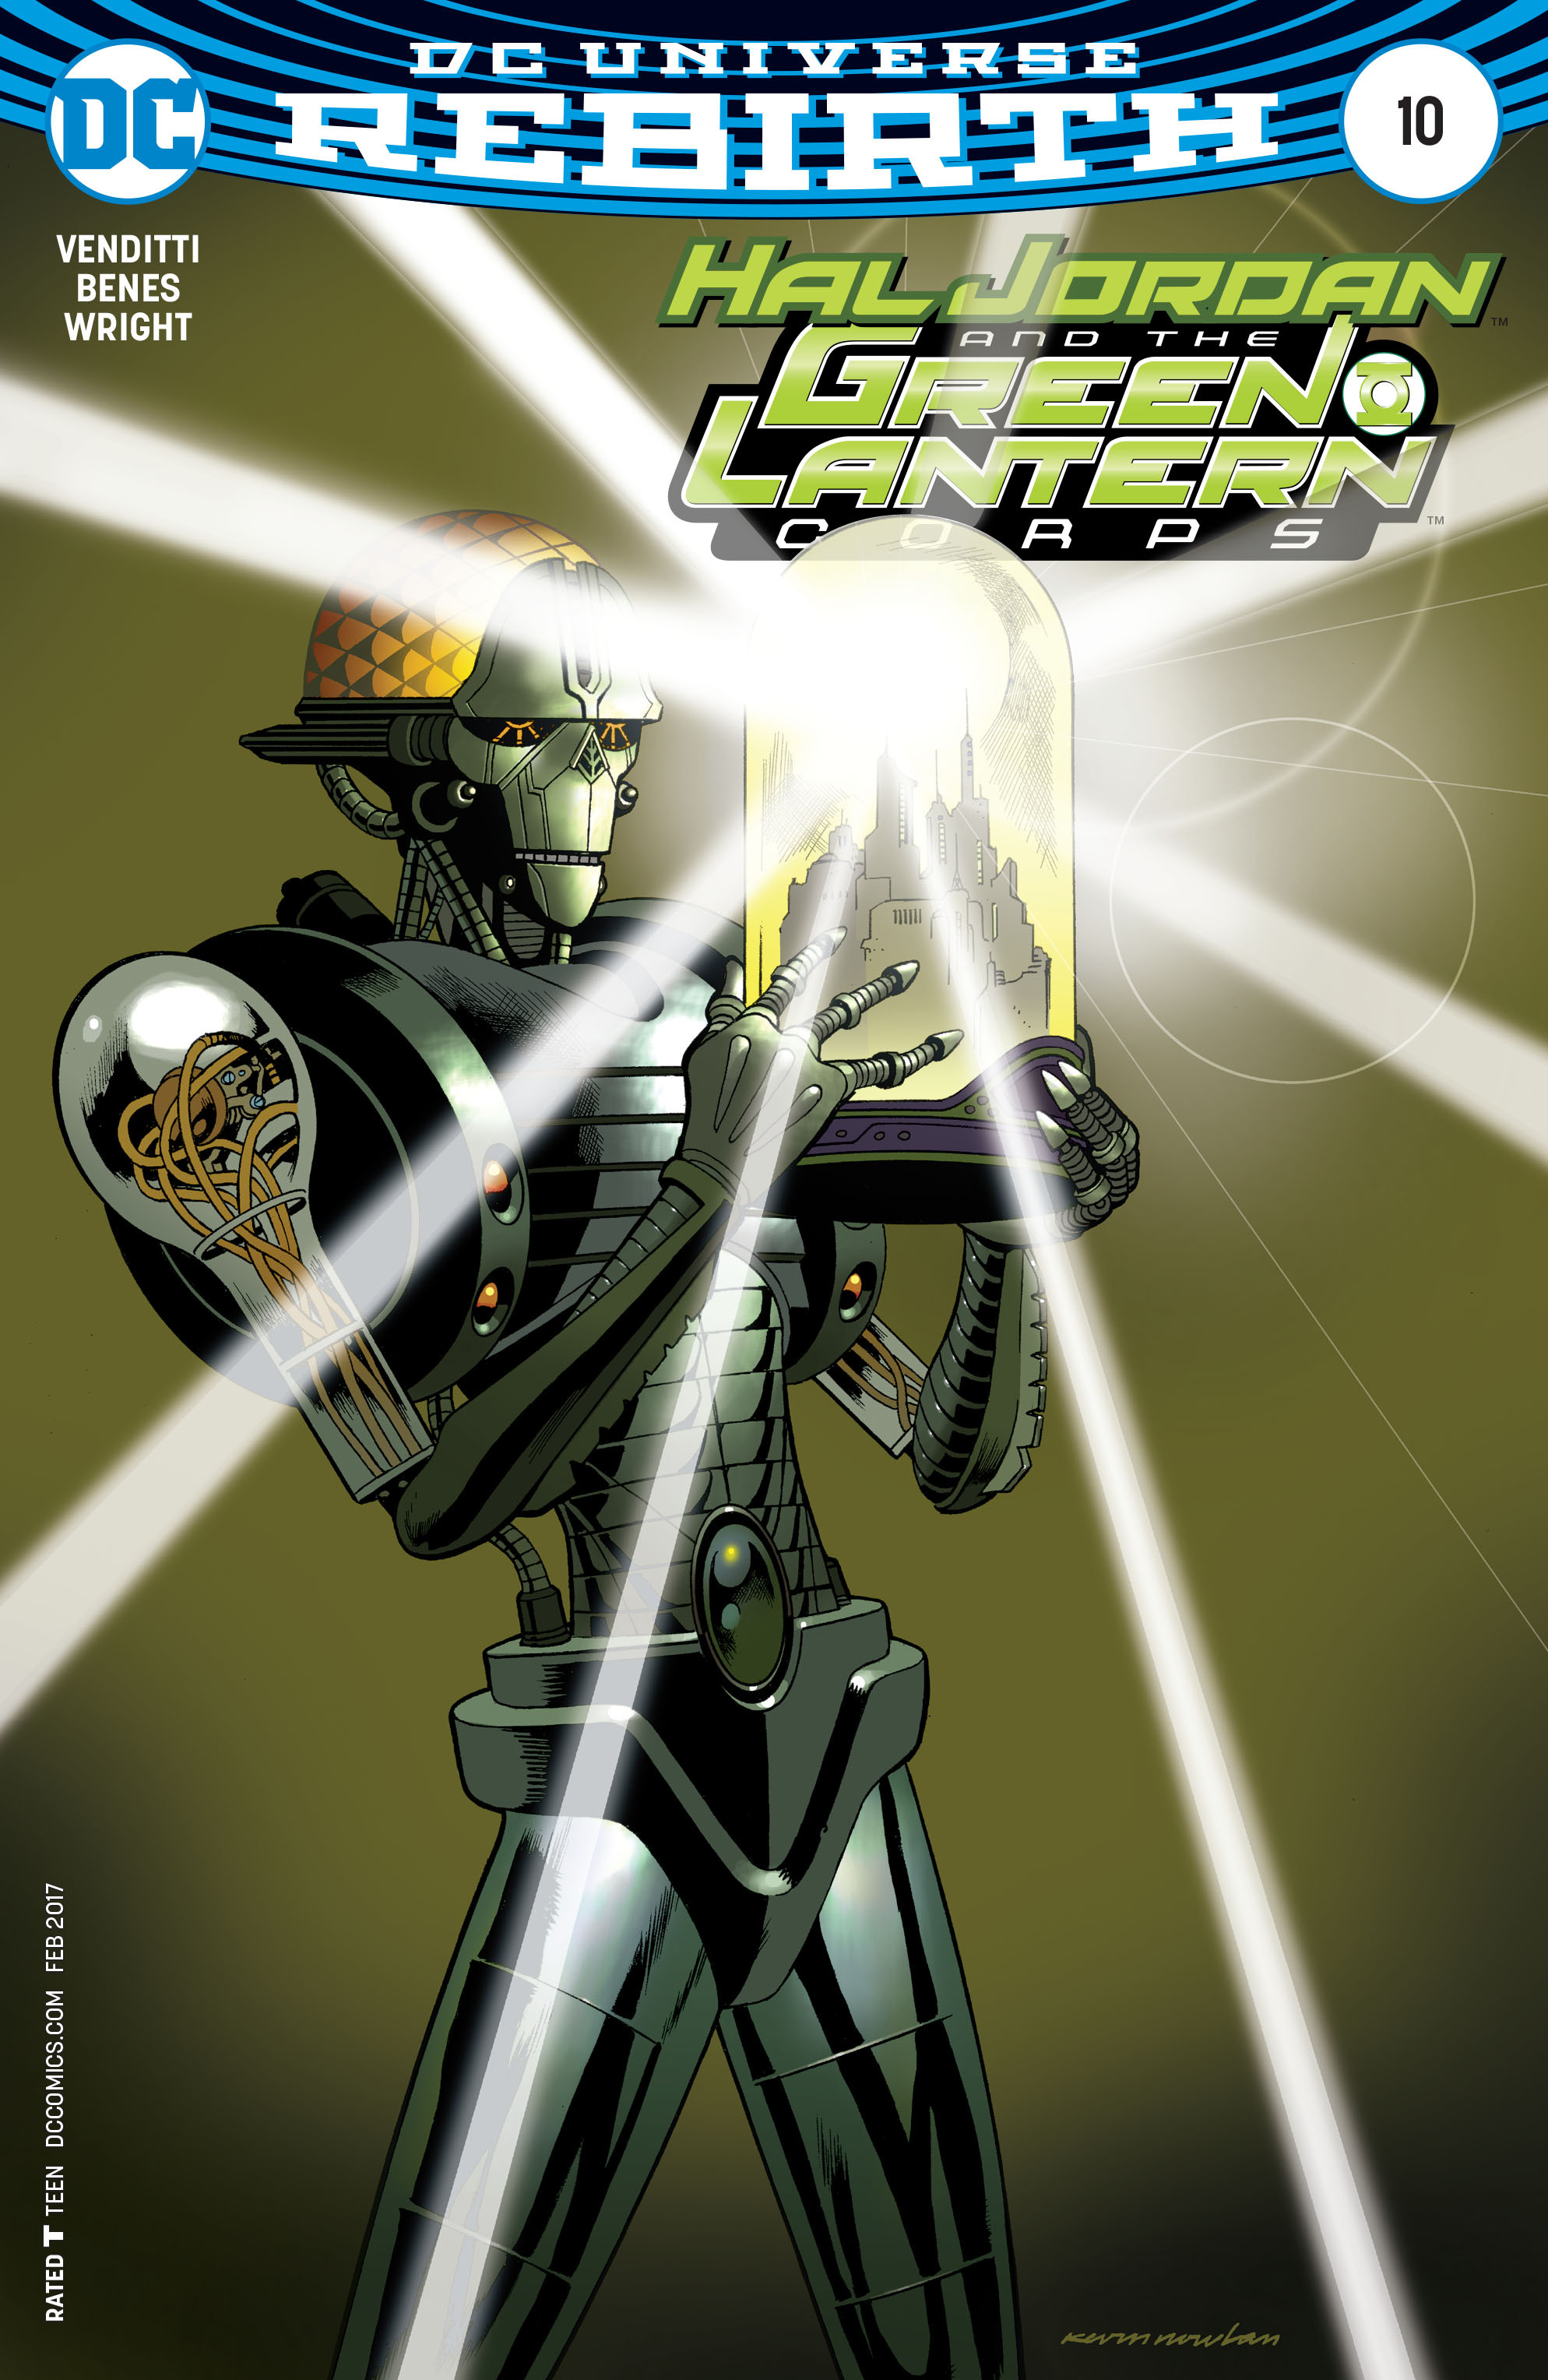 Read online Hal Jordan And The Green Lantern Corps comic -  Issue #10 - 3